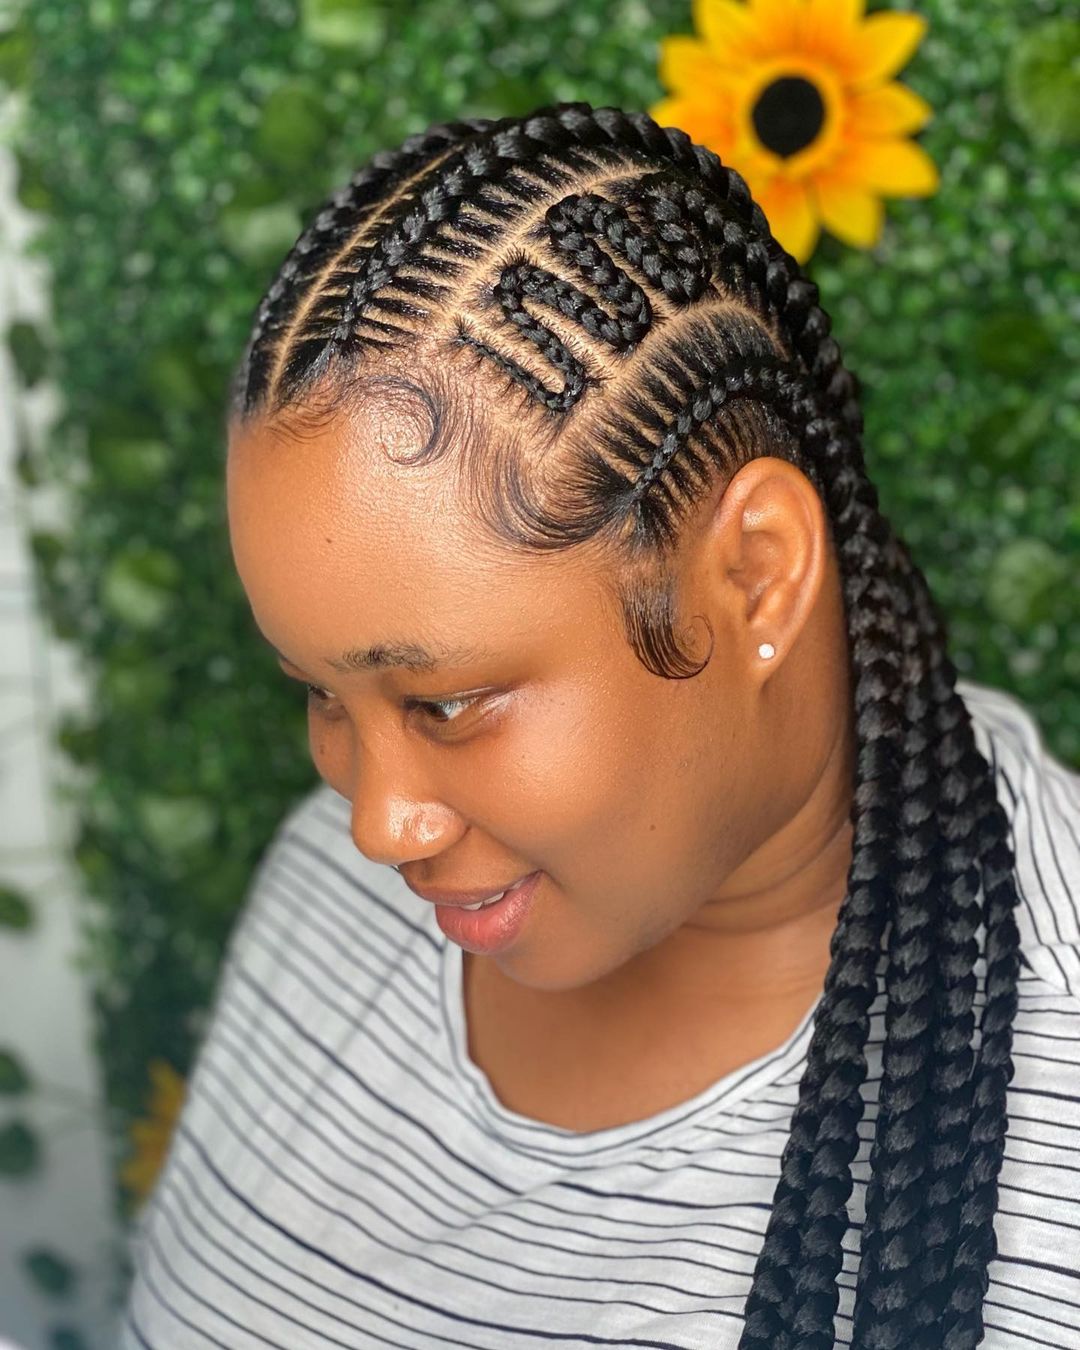 New, stunning Cornrows braids hairstyle for African women